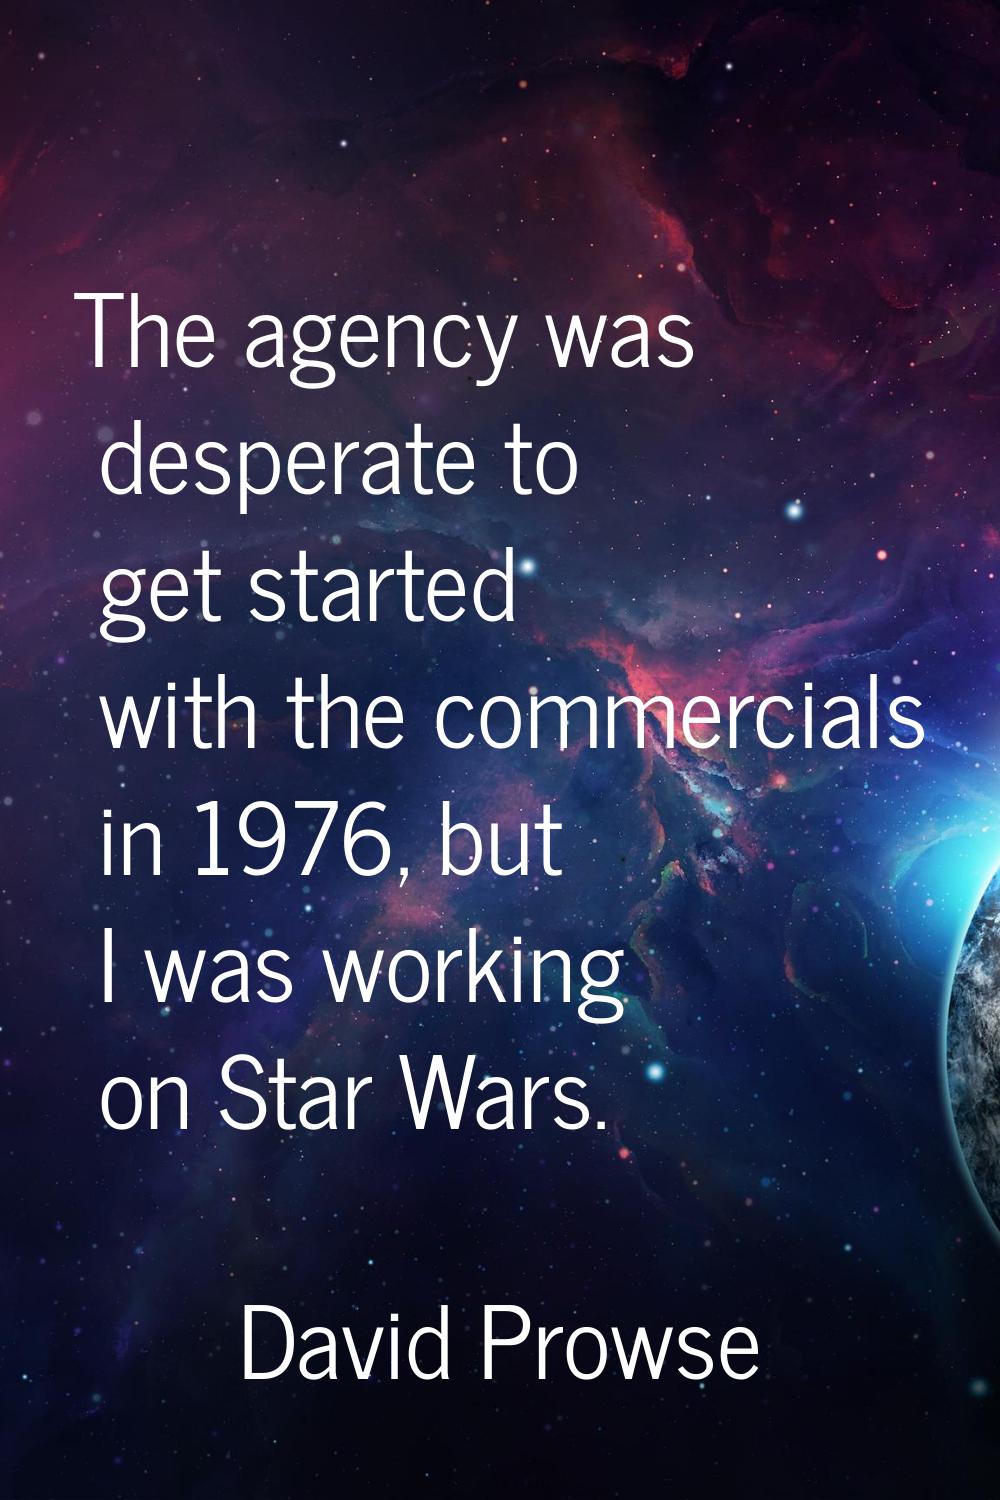 The agency was desperate to get started with the commercials in 1976, but I was working on Star War